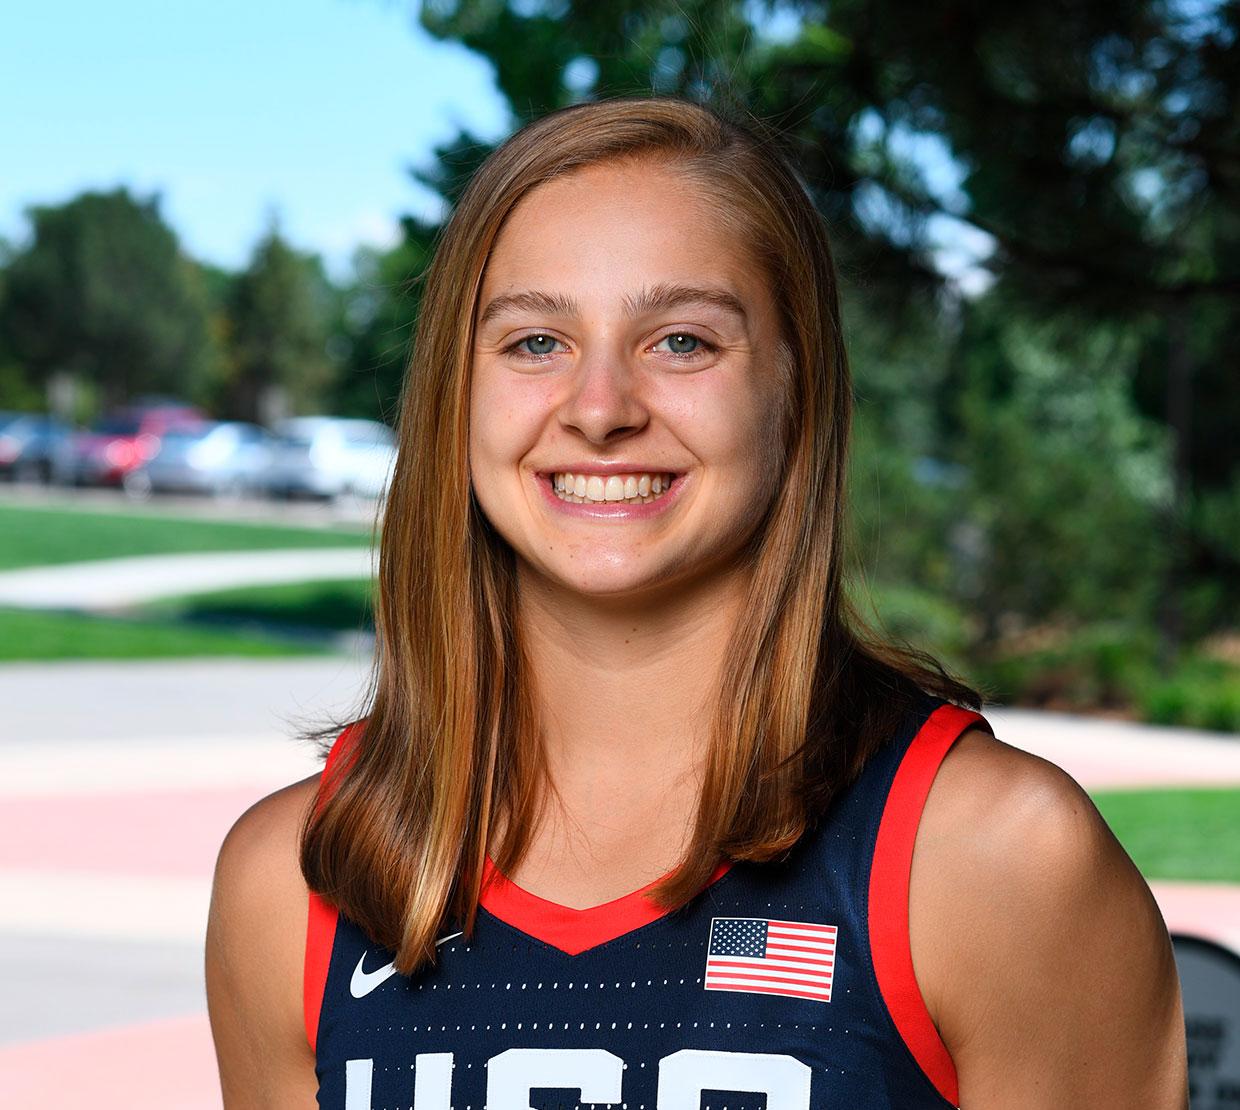 Mikayla Pivec standing in outdoor plaza, wearing a USA basketball jersey